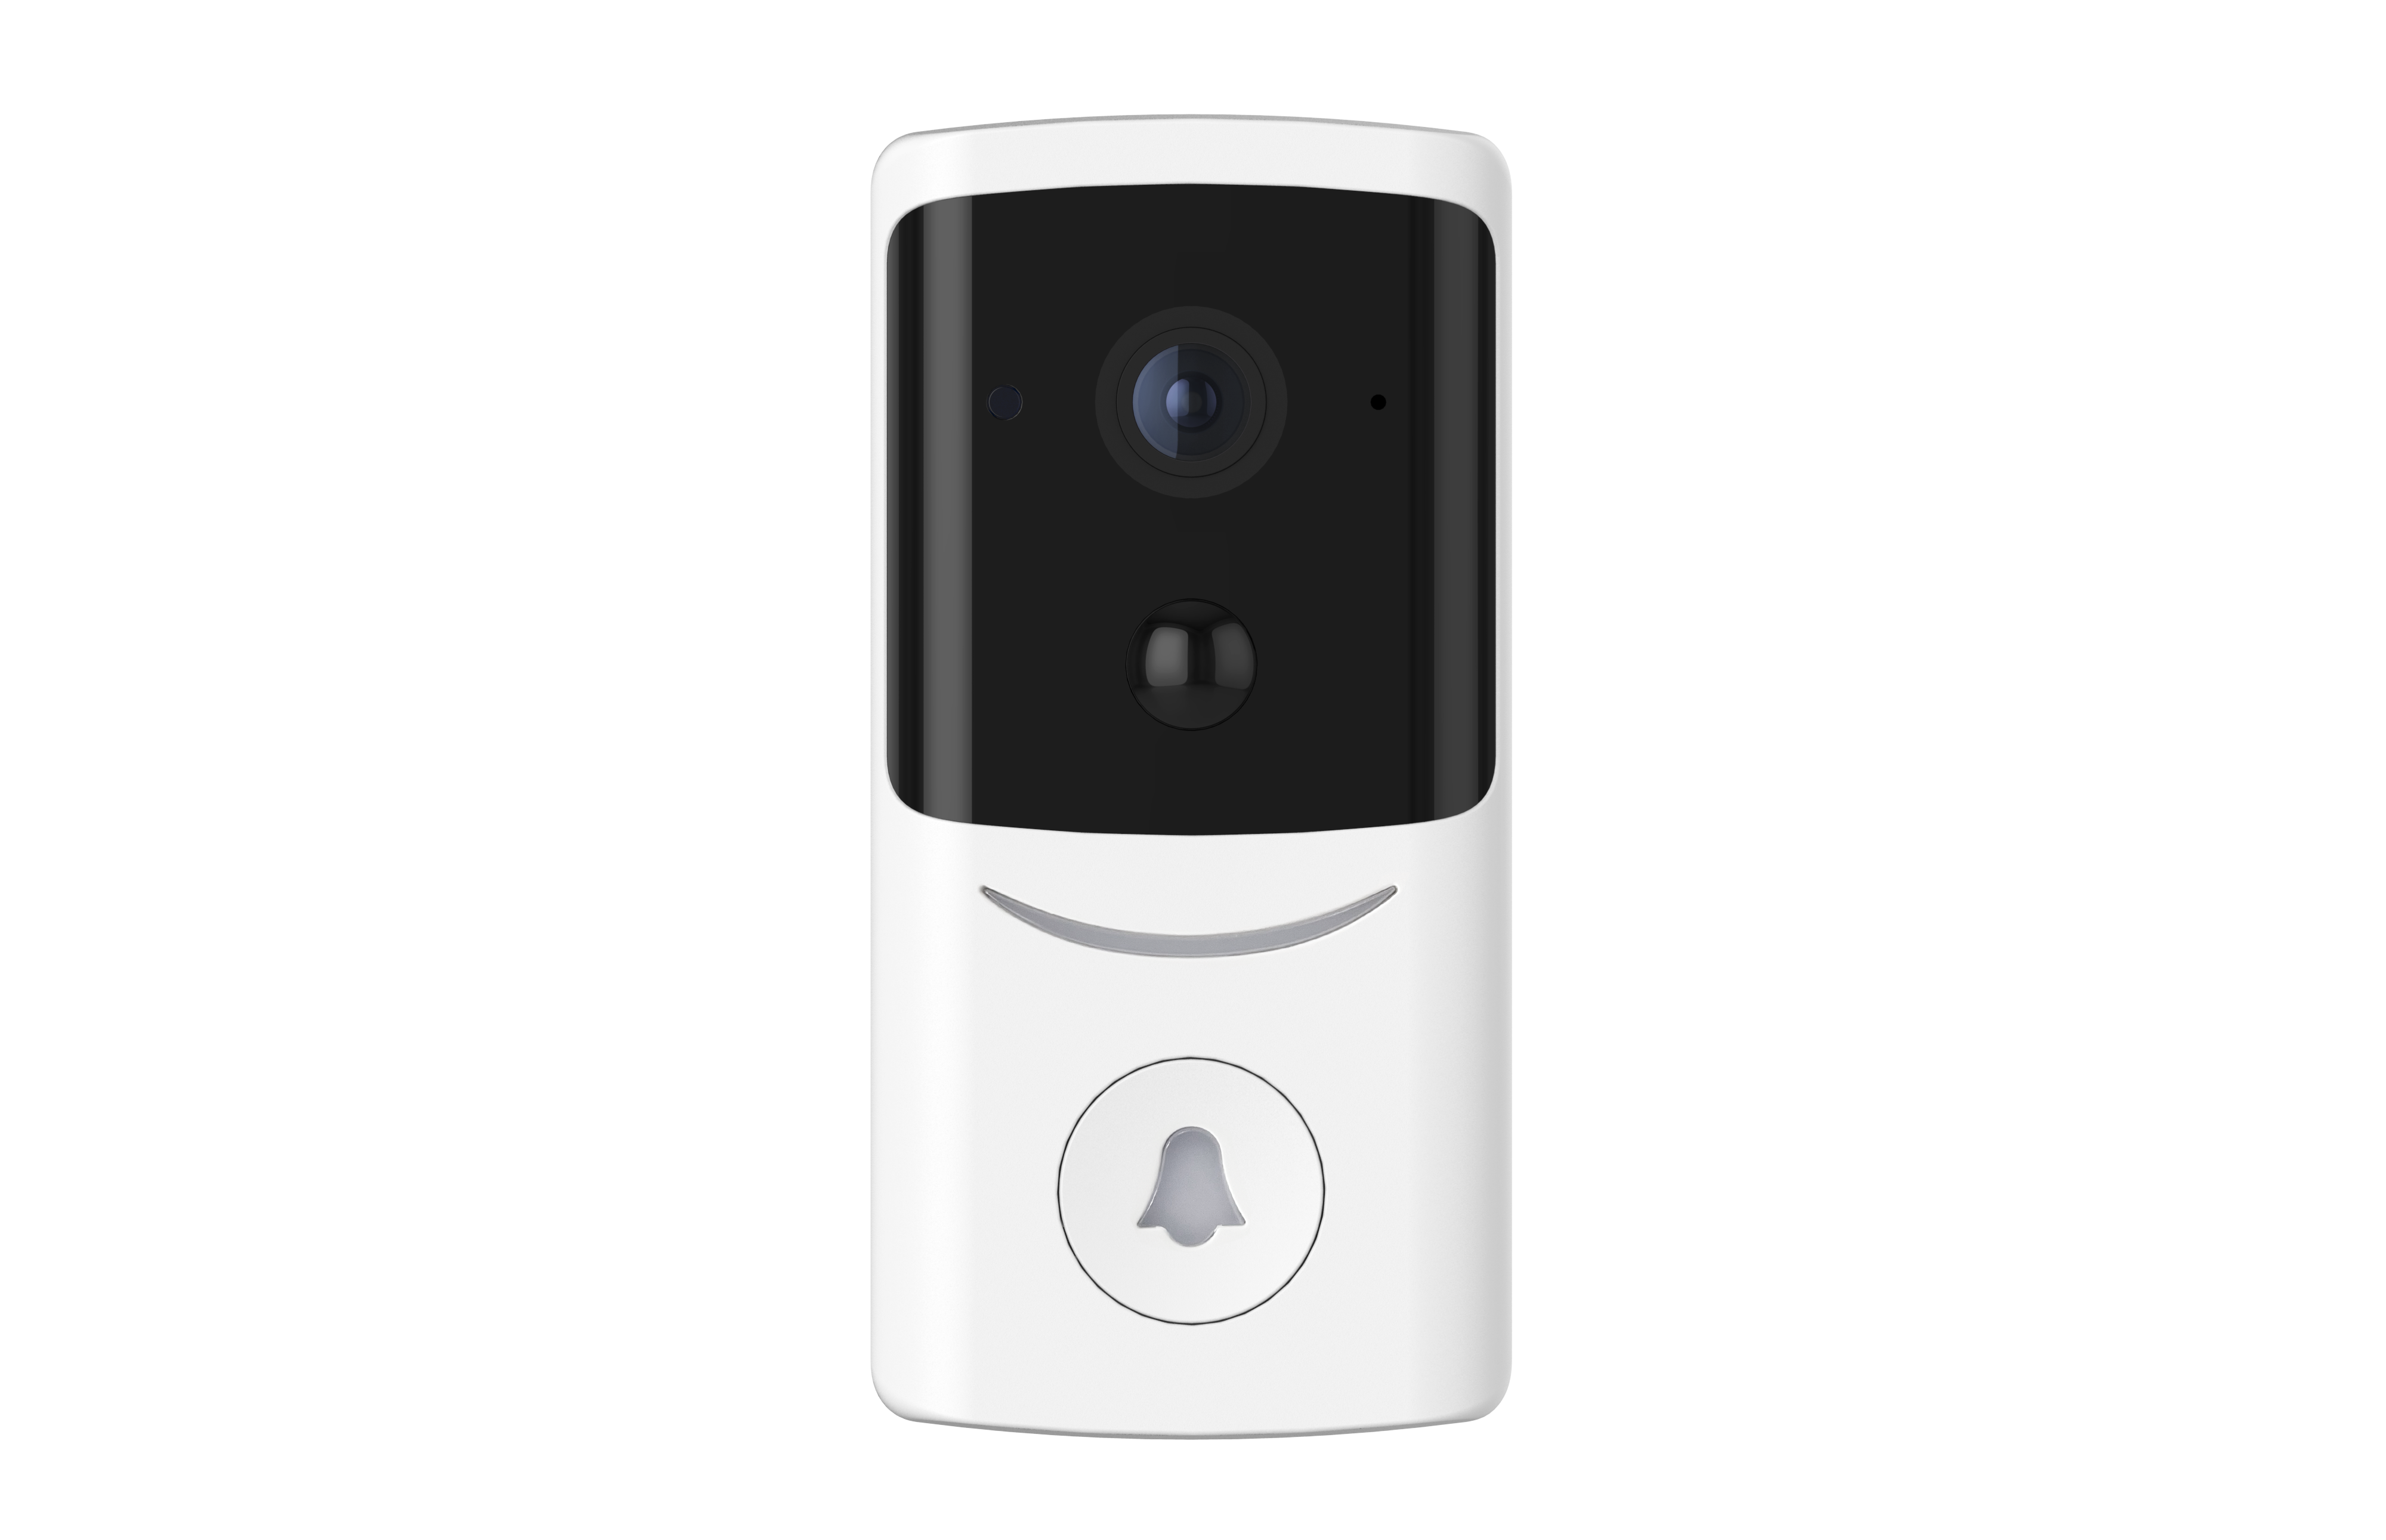 What function does the video doorbell camera have?